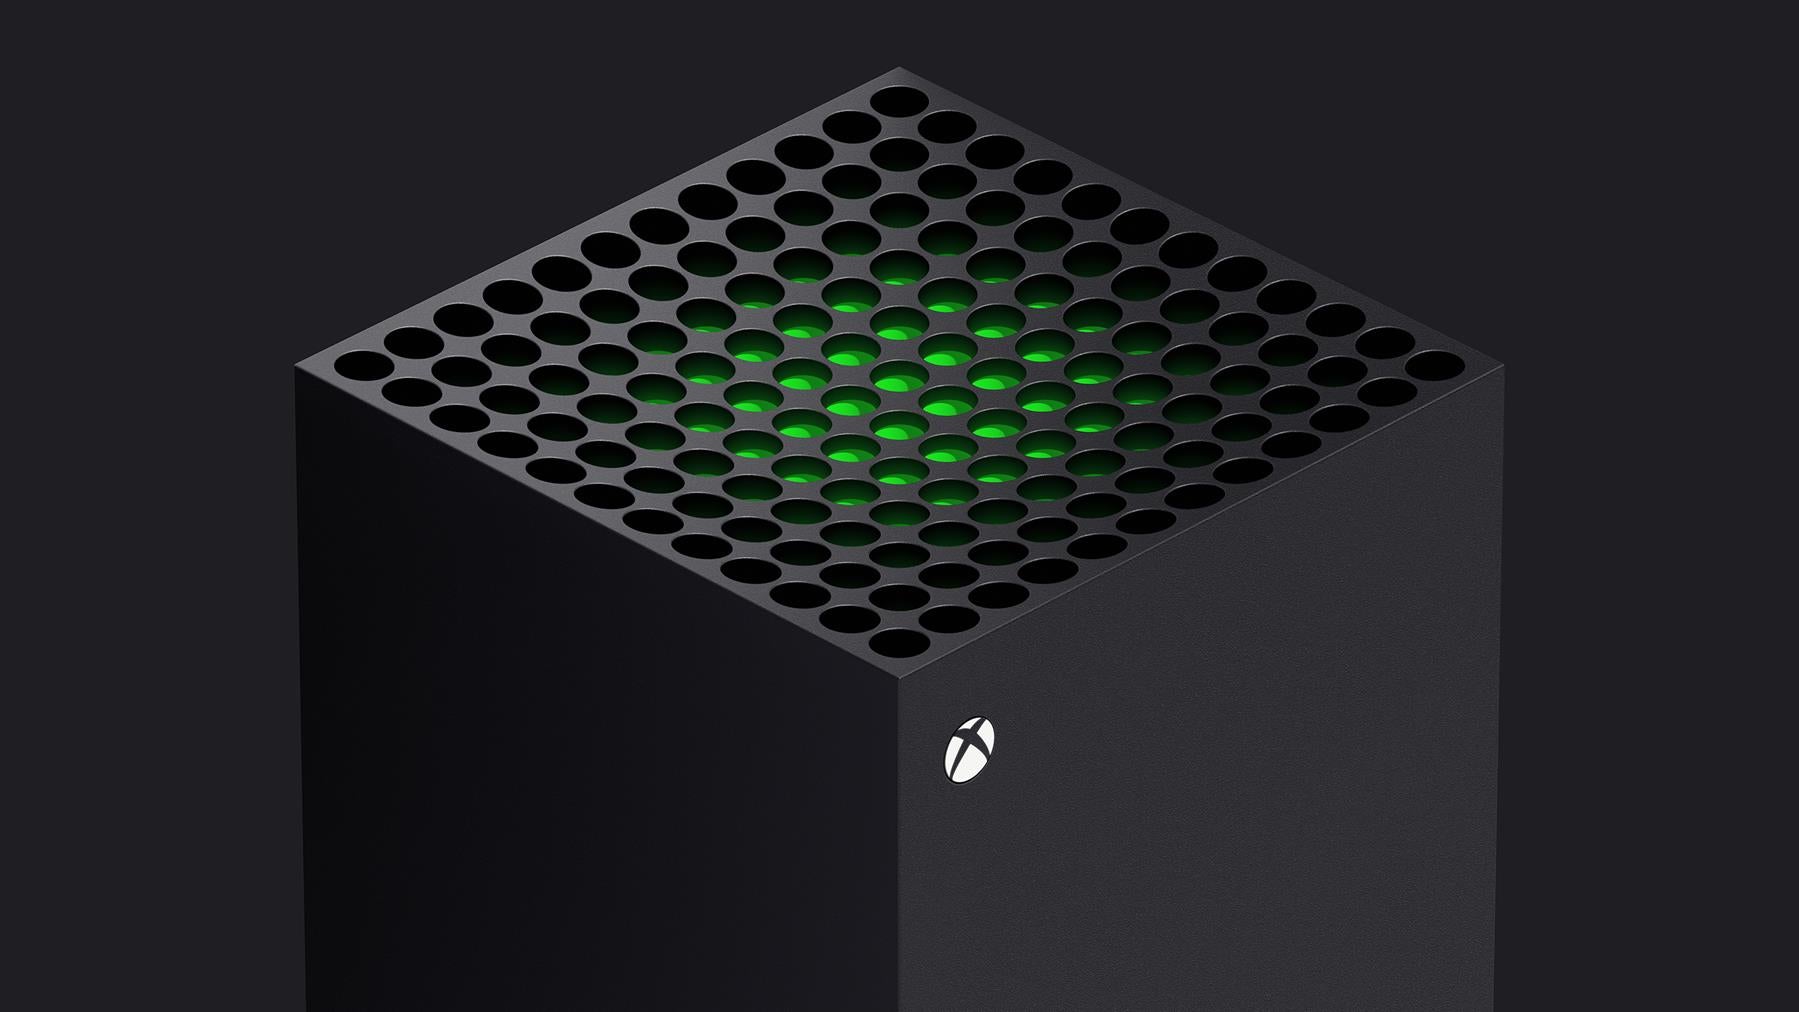 Image for Xbox Series X/S manufacturing started later than PS5 to implement specific AMD RDNA 2 tech